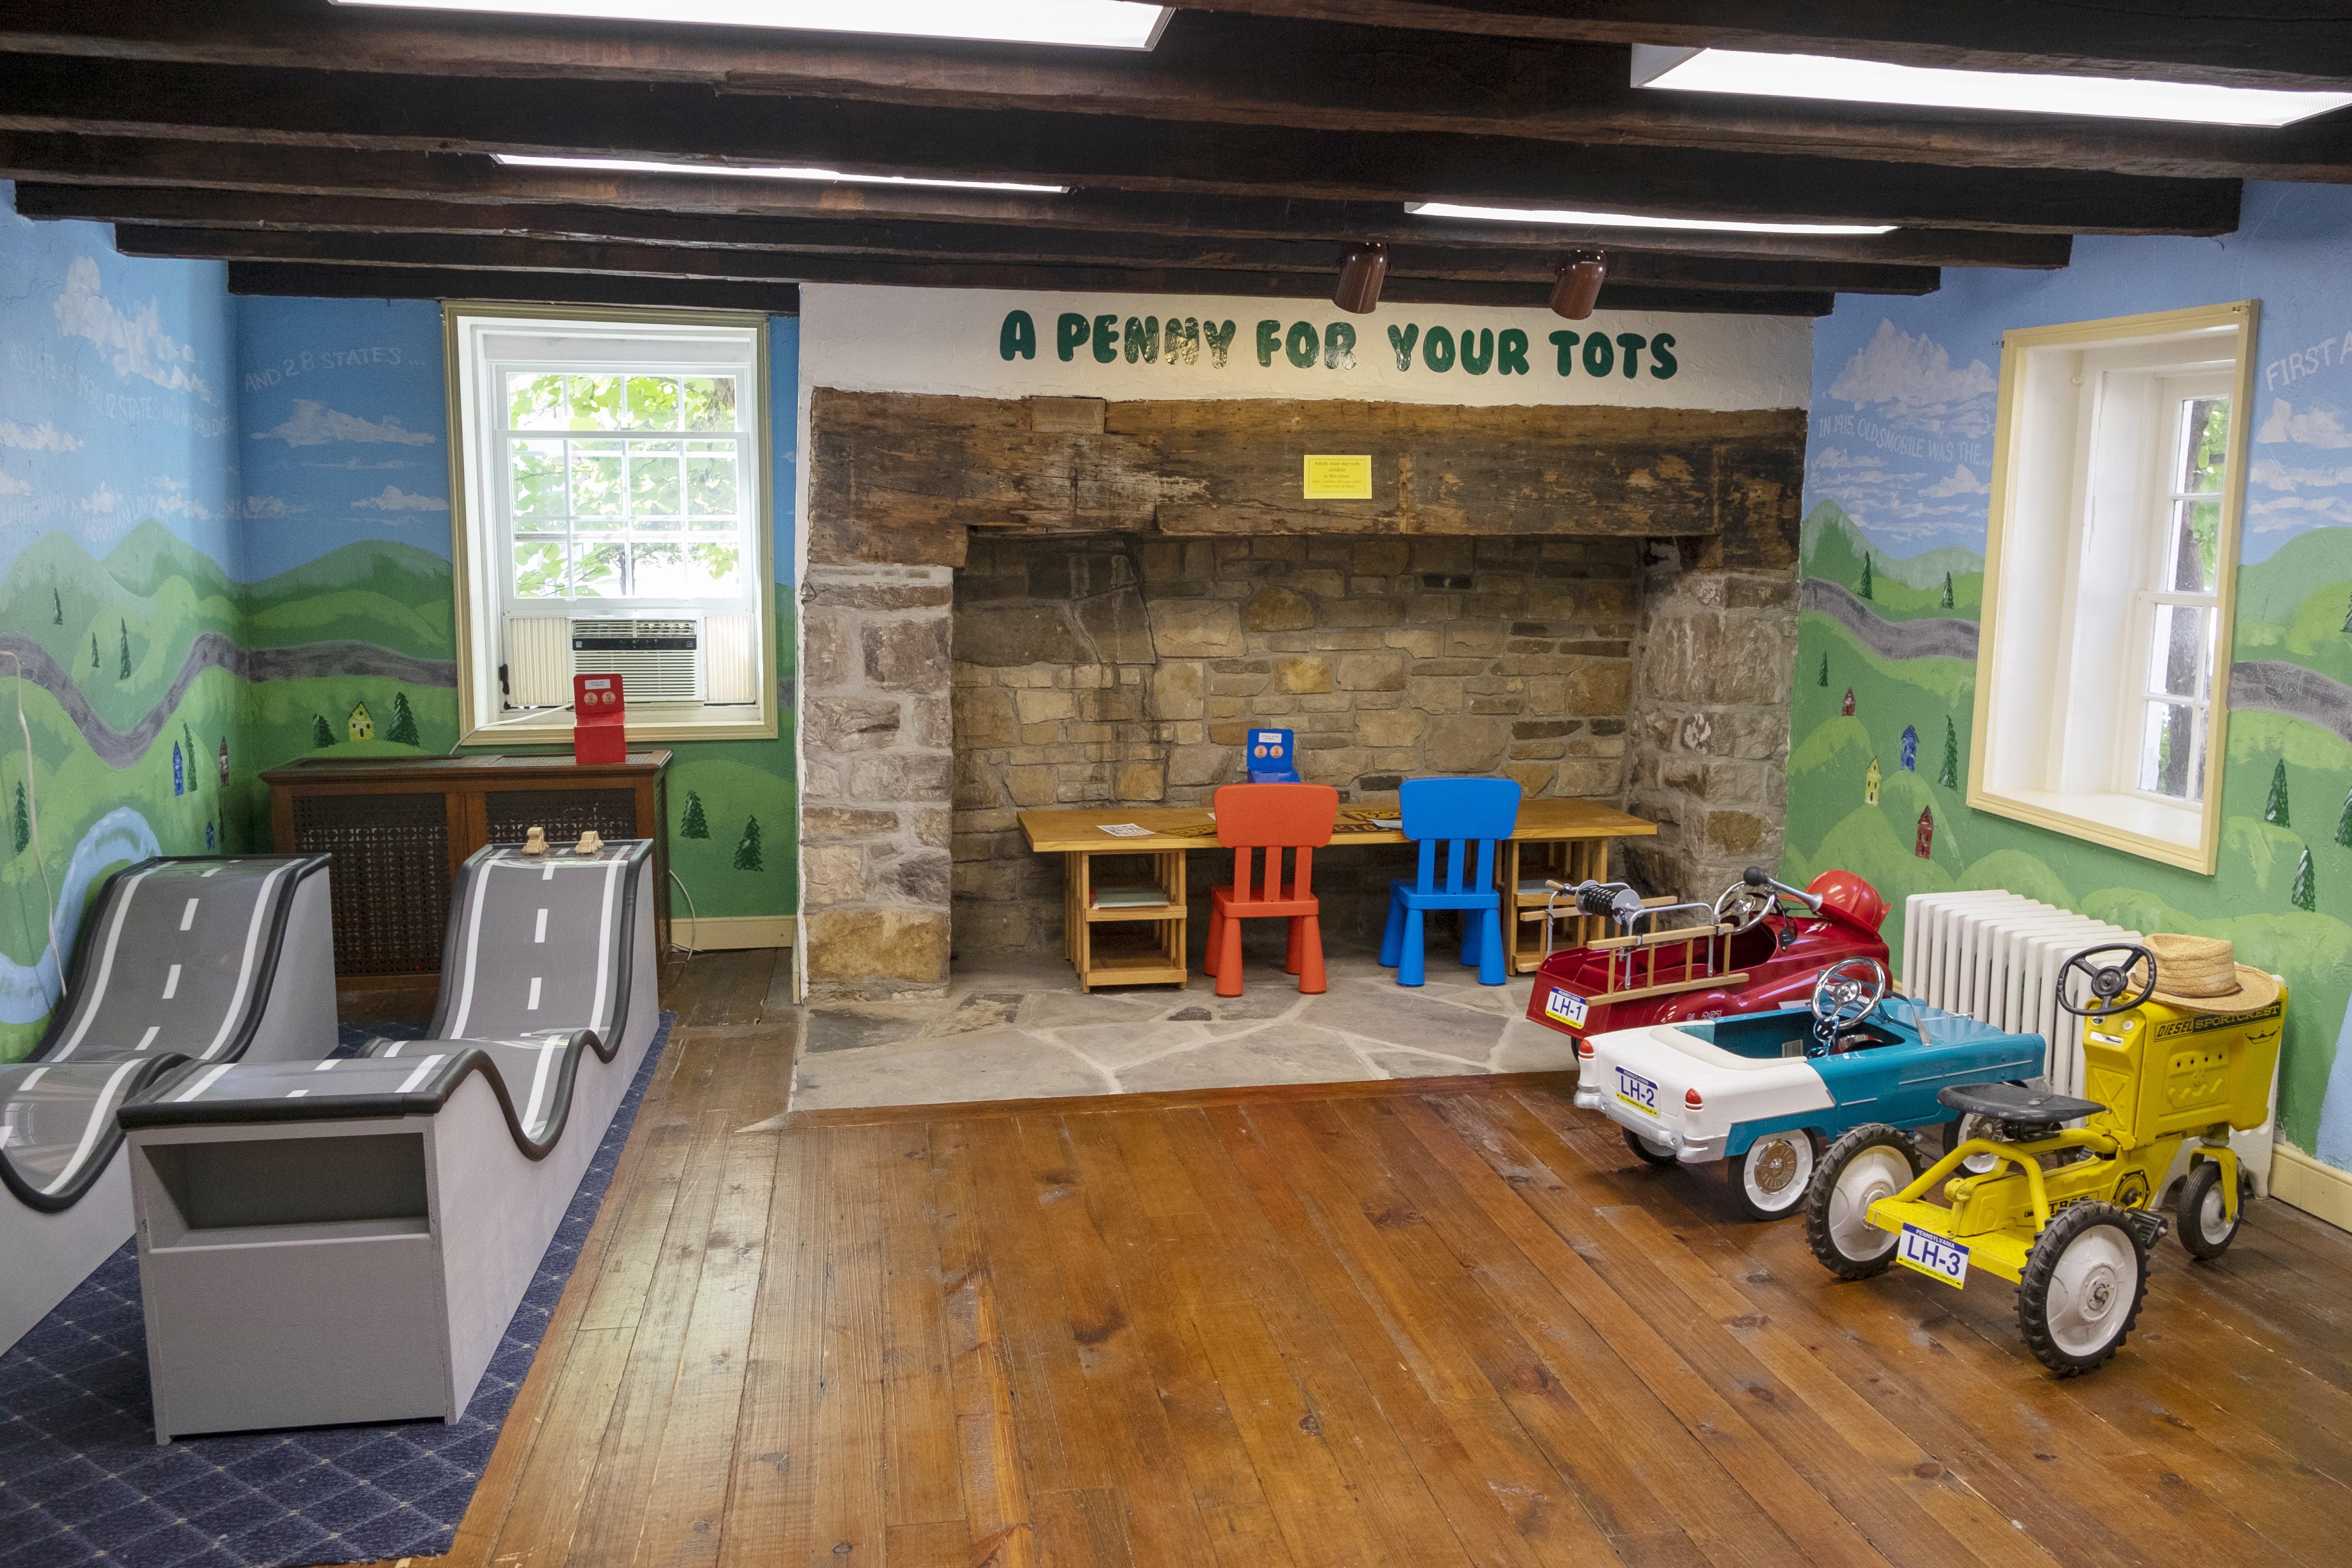 Lincoln Highway Experience's A Penny For Your Tots Kids' Room